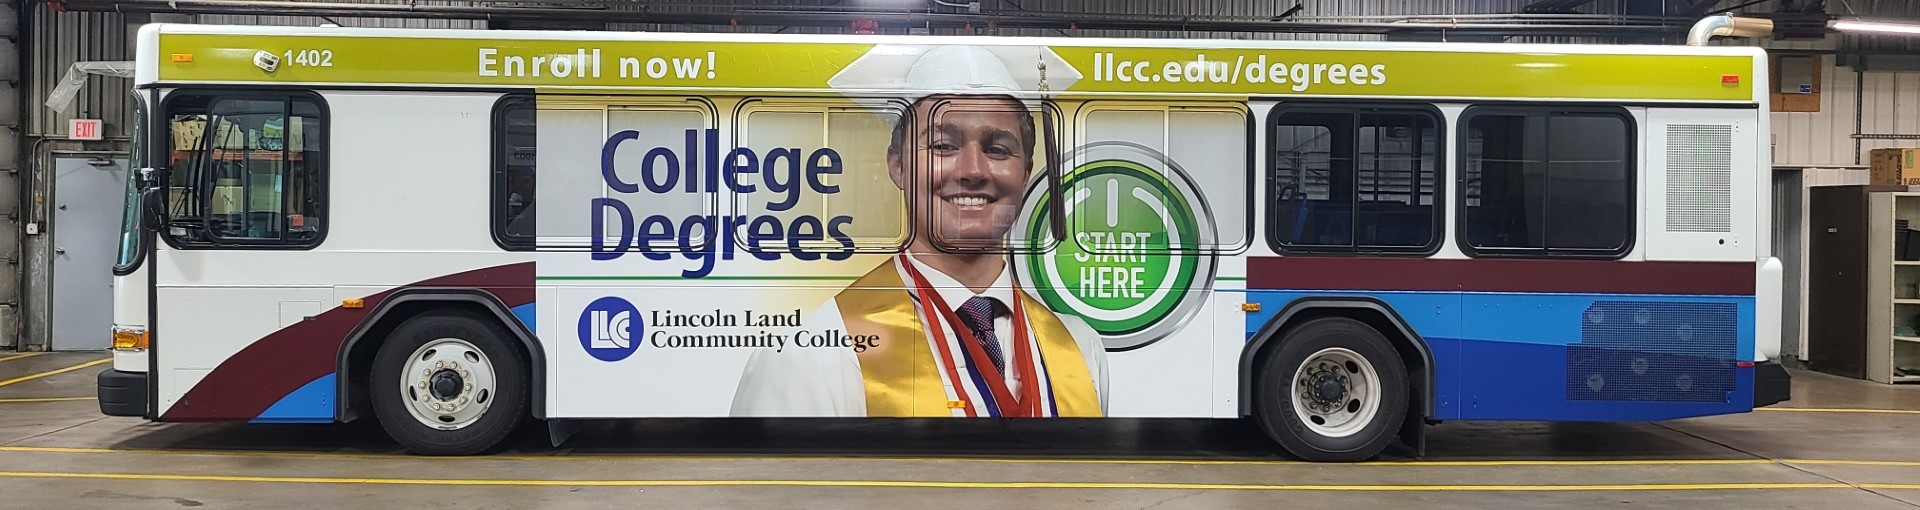 On side of bus: College Degrees. Start Here button. Lincoln Land Community College. Enroll now! 